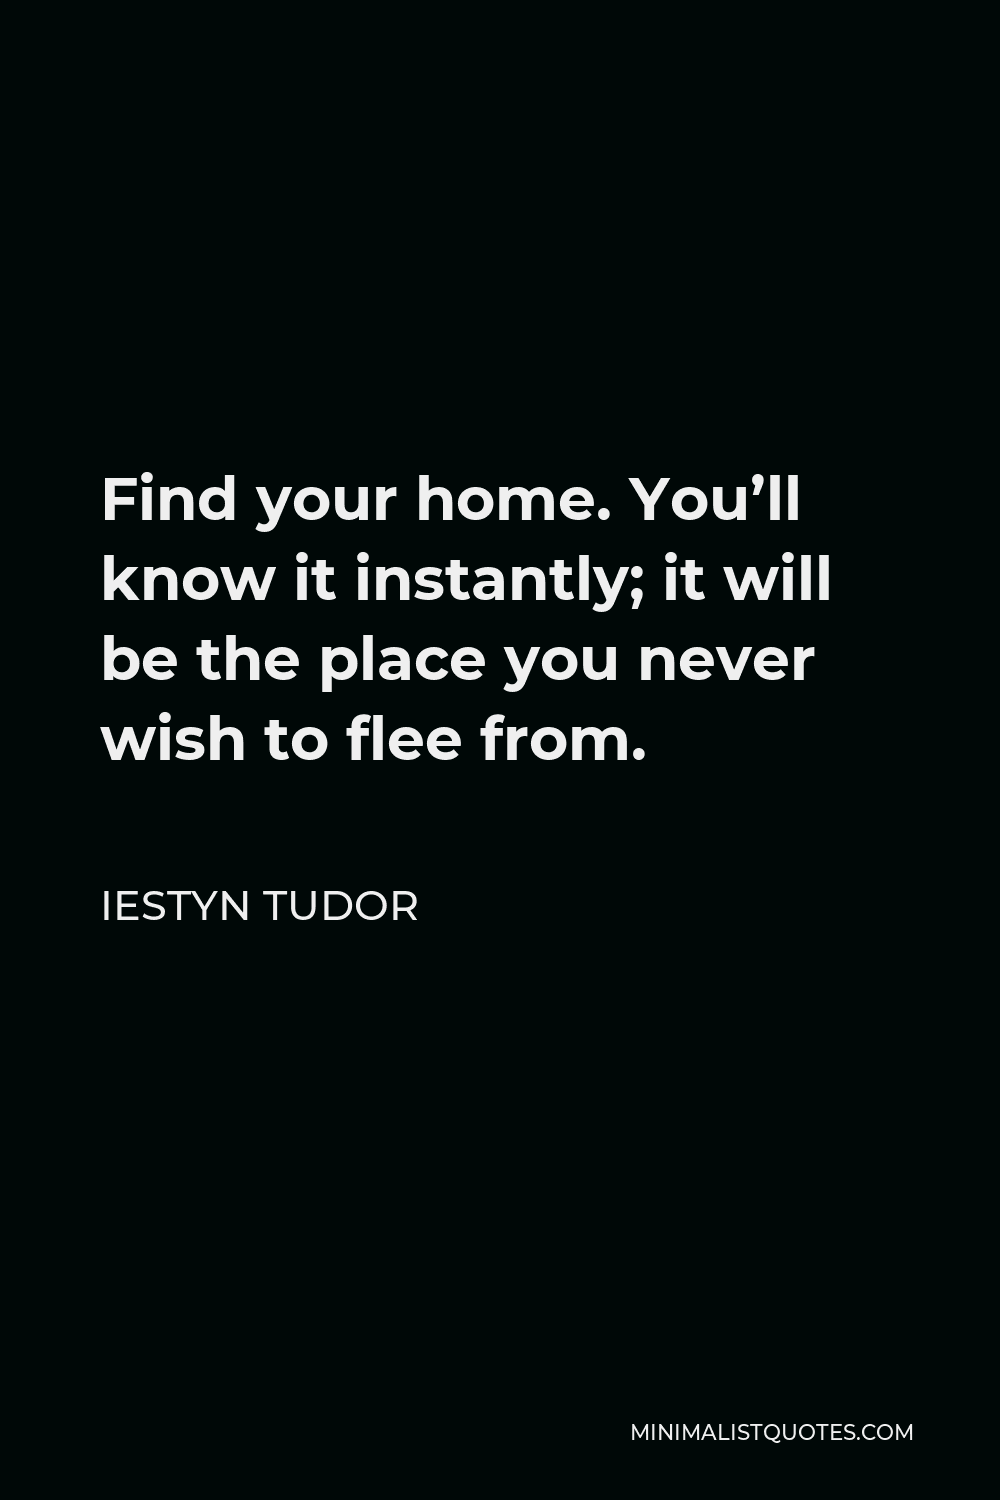 Iestyn Tudor Quote - Find your home. You’ll know it instantly; it will be the place you never wish to flee from.